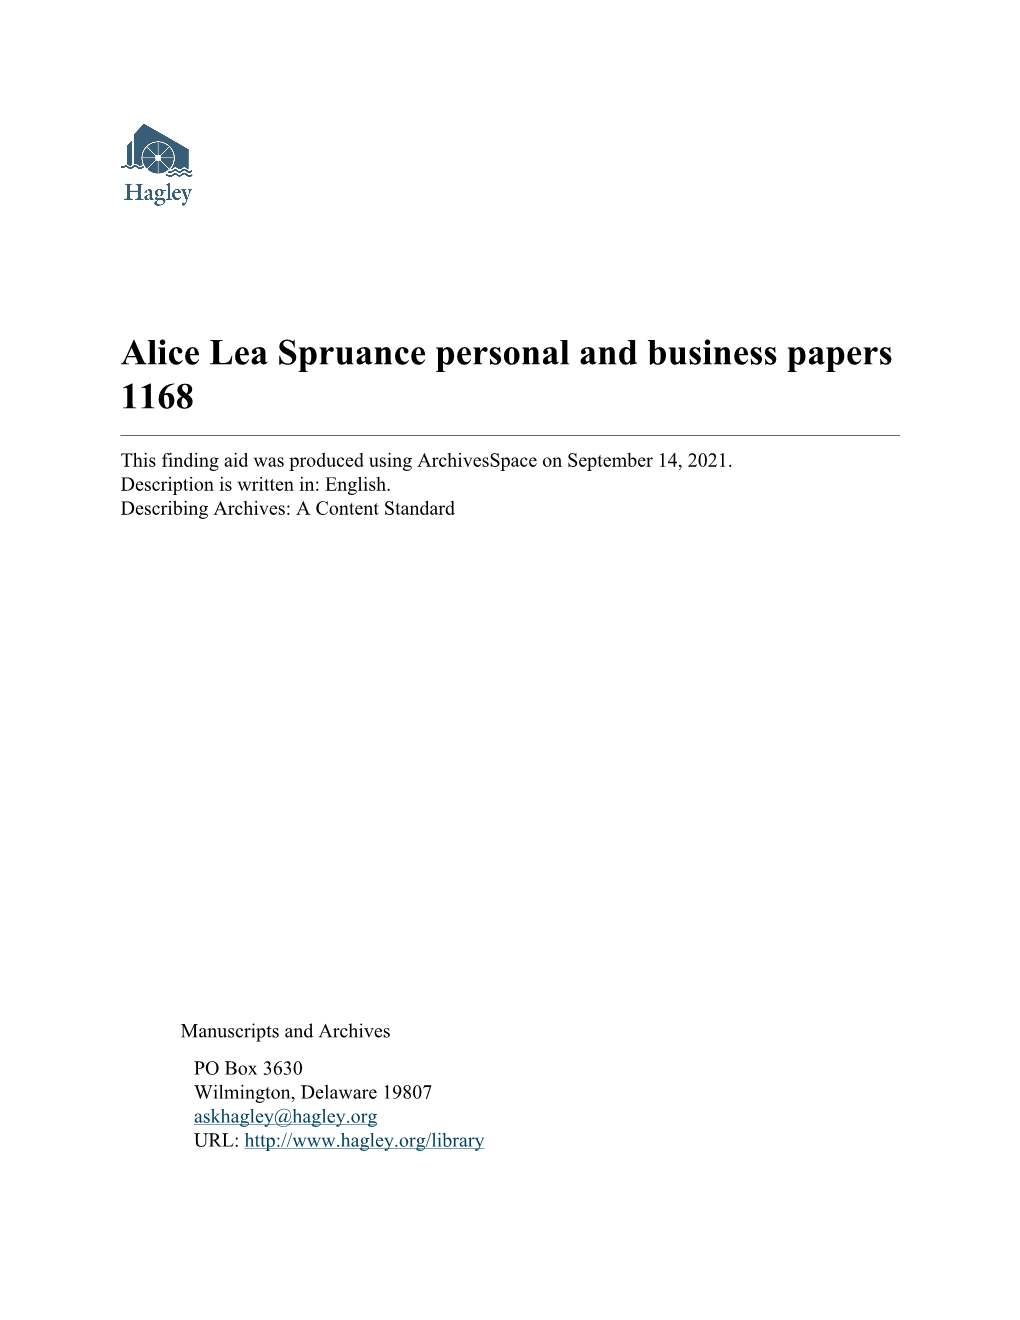 Alice Lea Spruance Personal and Business Papers 1168